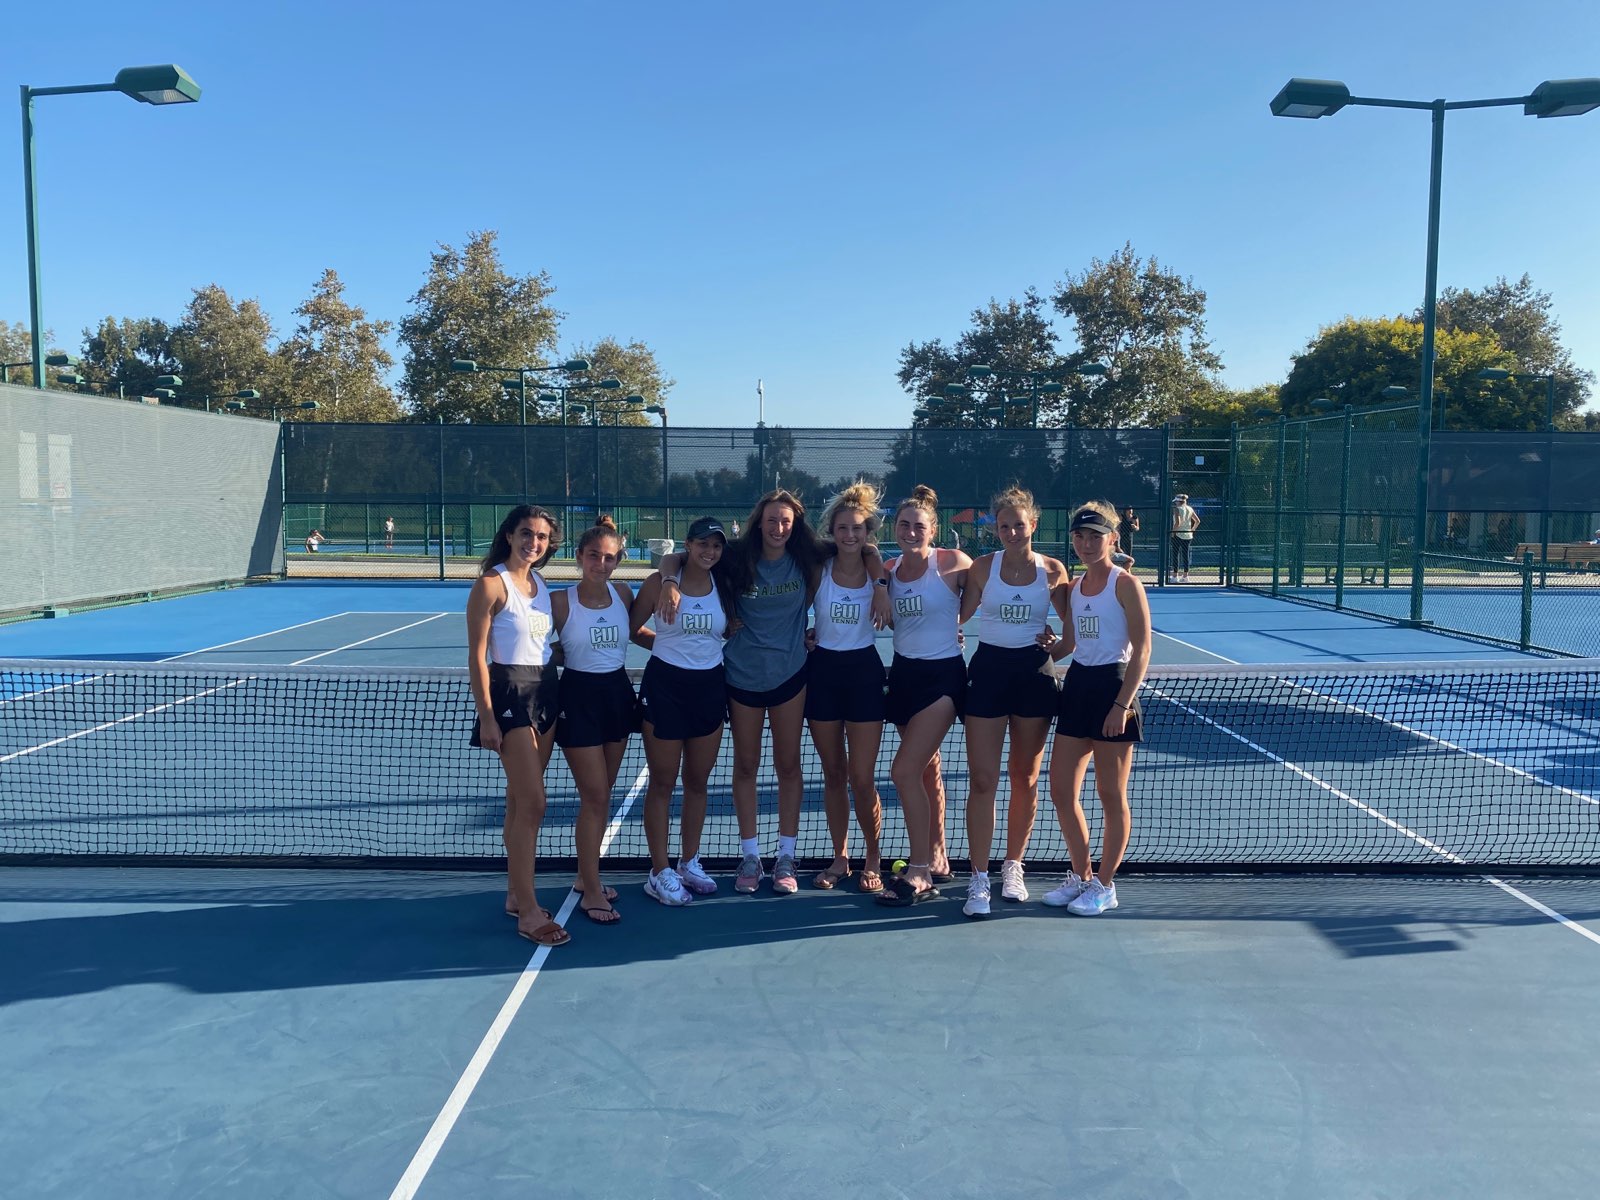 The women’s team poses after a practice at the tennis courts.